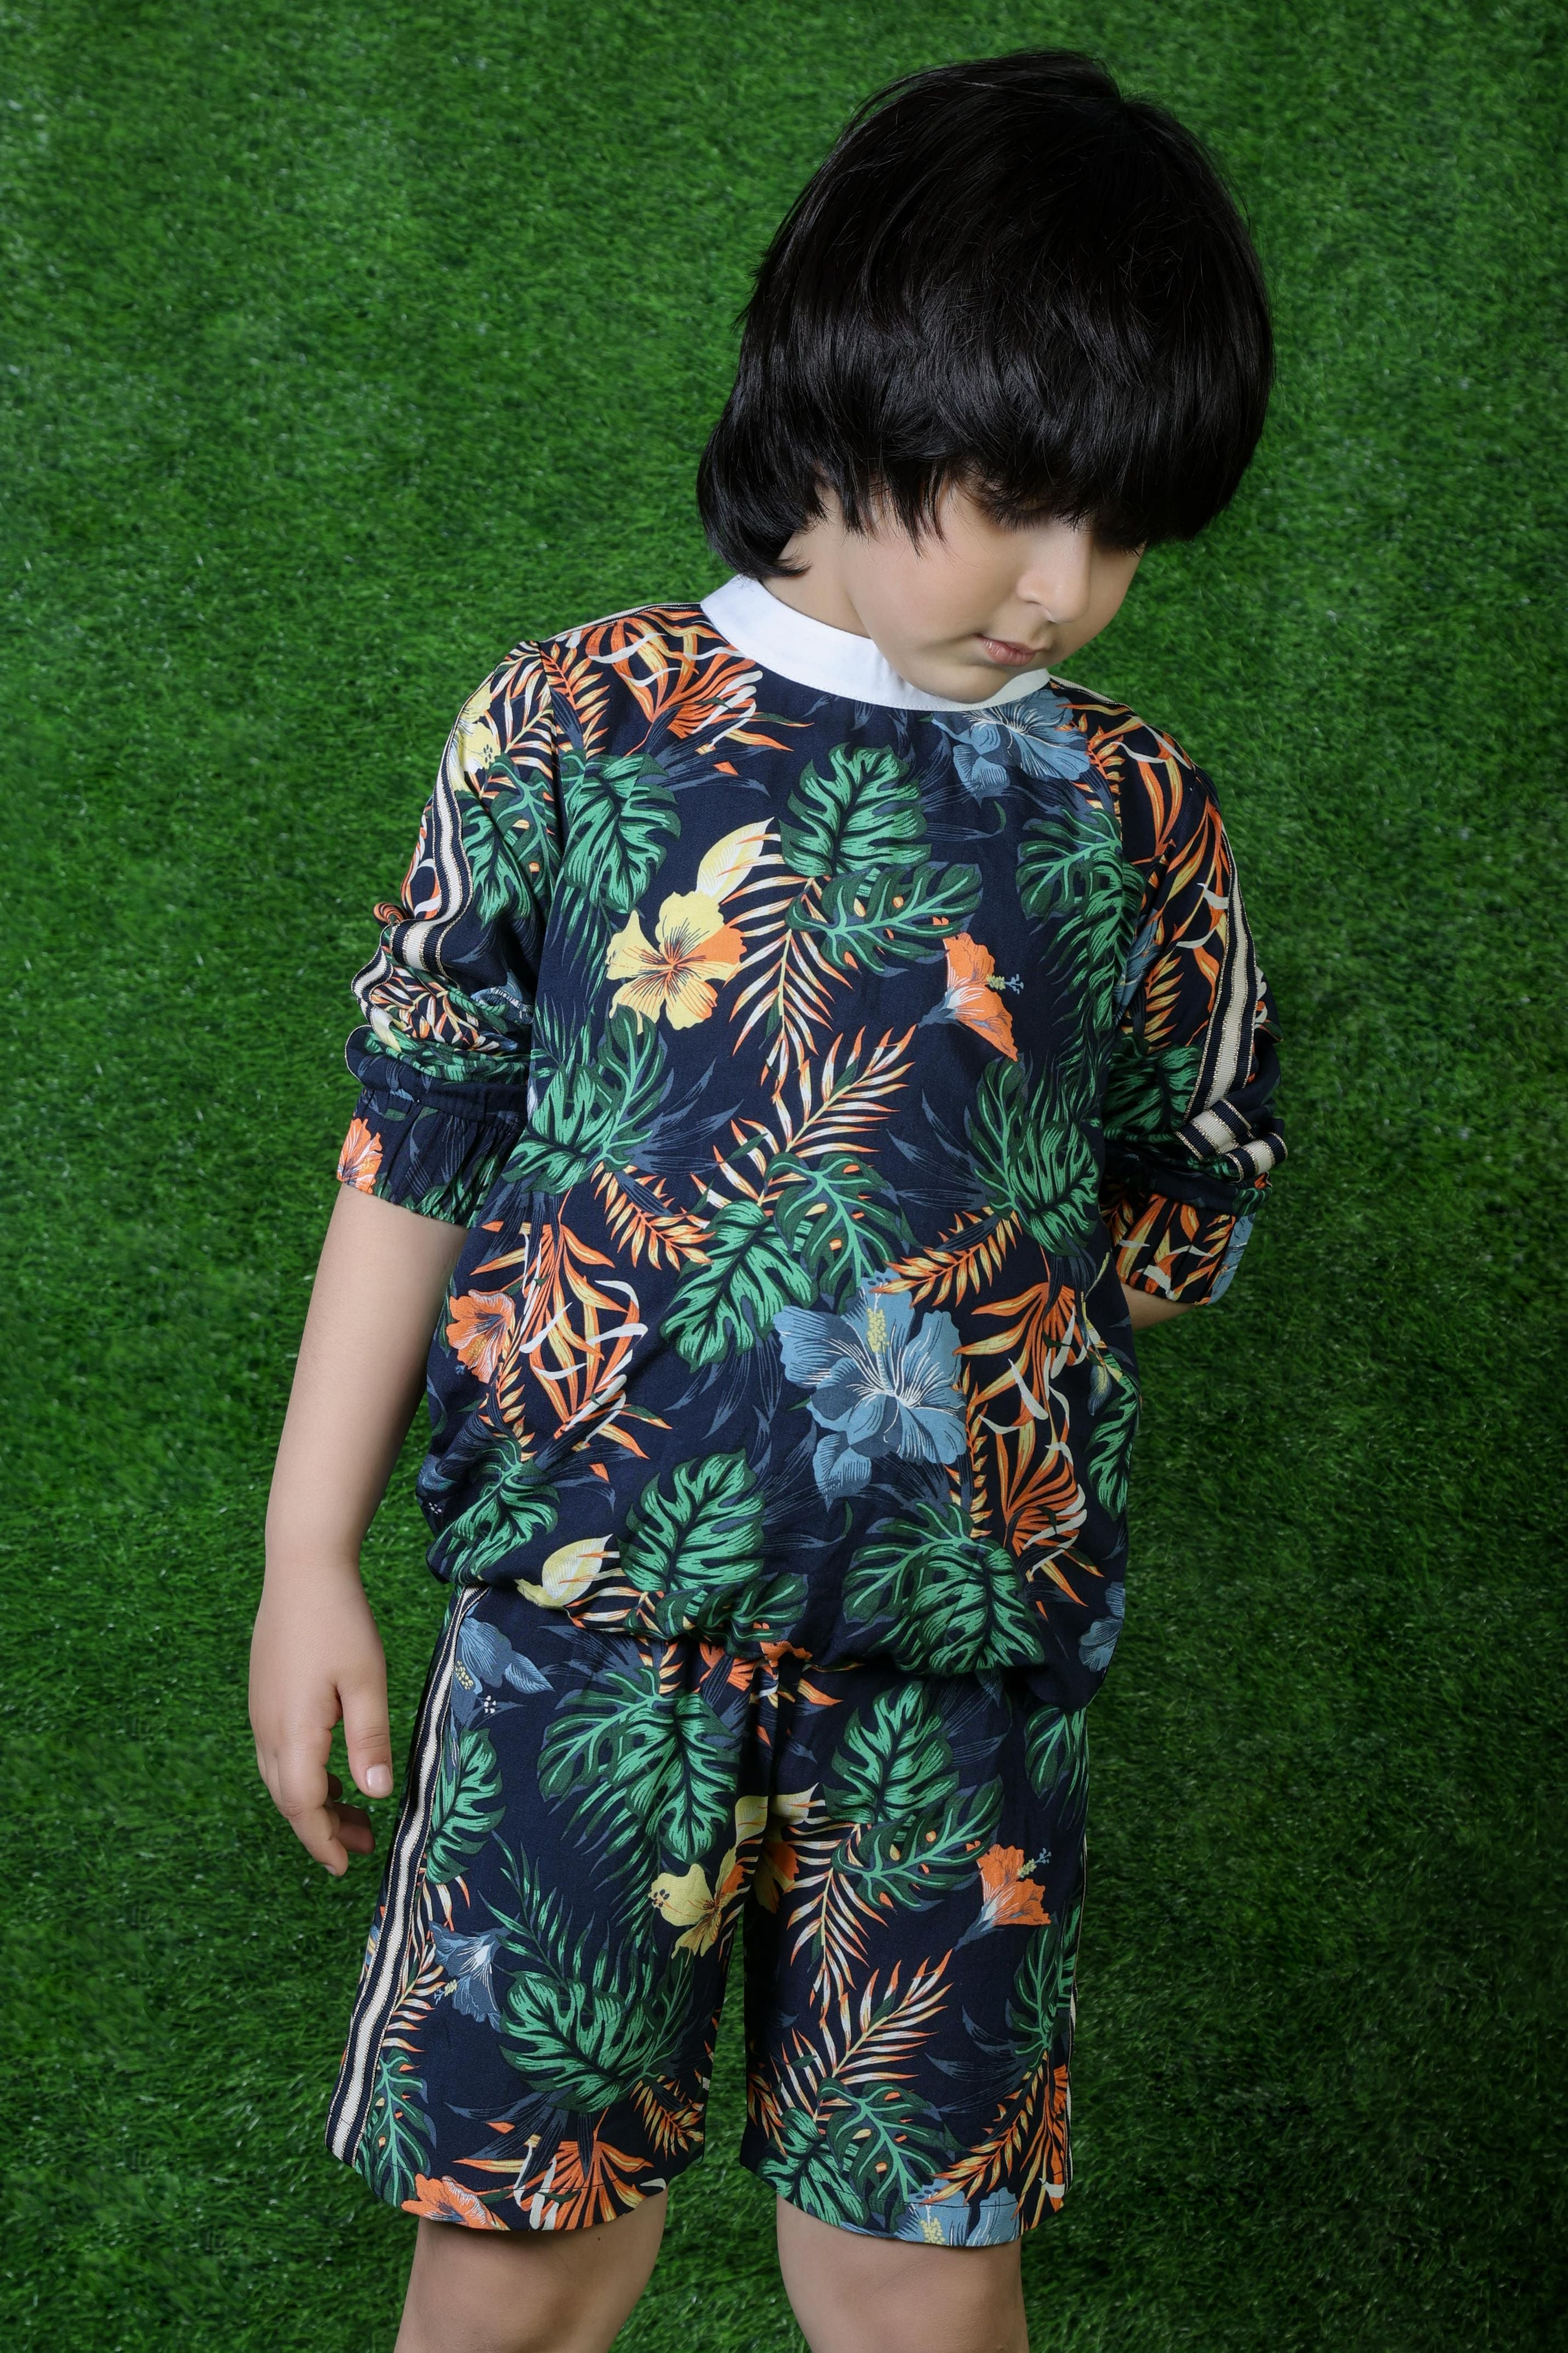 OASIS BOYS SET - SET OF TWO (TOP + SHORTS) - The Pony & Peony Co.